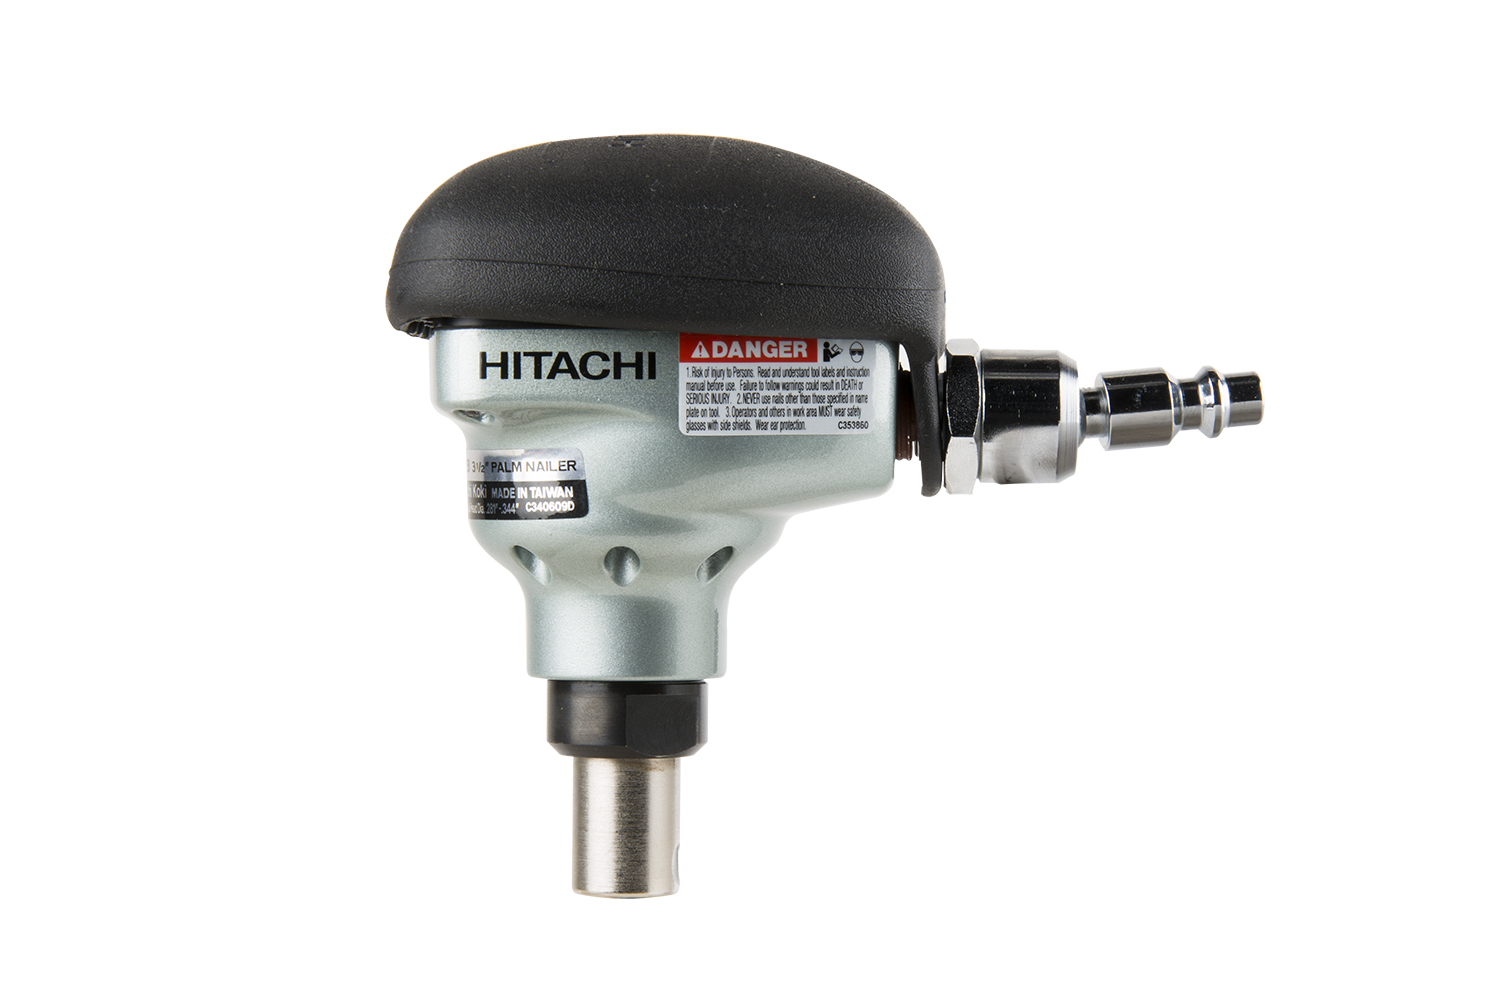 Hitachi Power Tools recently announced the newest addition to its extensive Pro Preferred Pneumatic Nailer lineup; a 3-1/2 inch Palm Nailer (Hitachis first), model NH90AB.